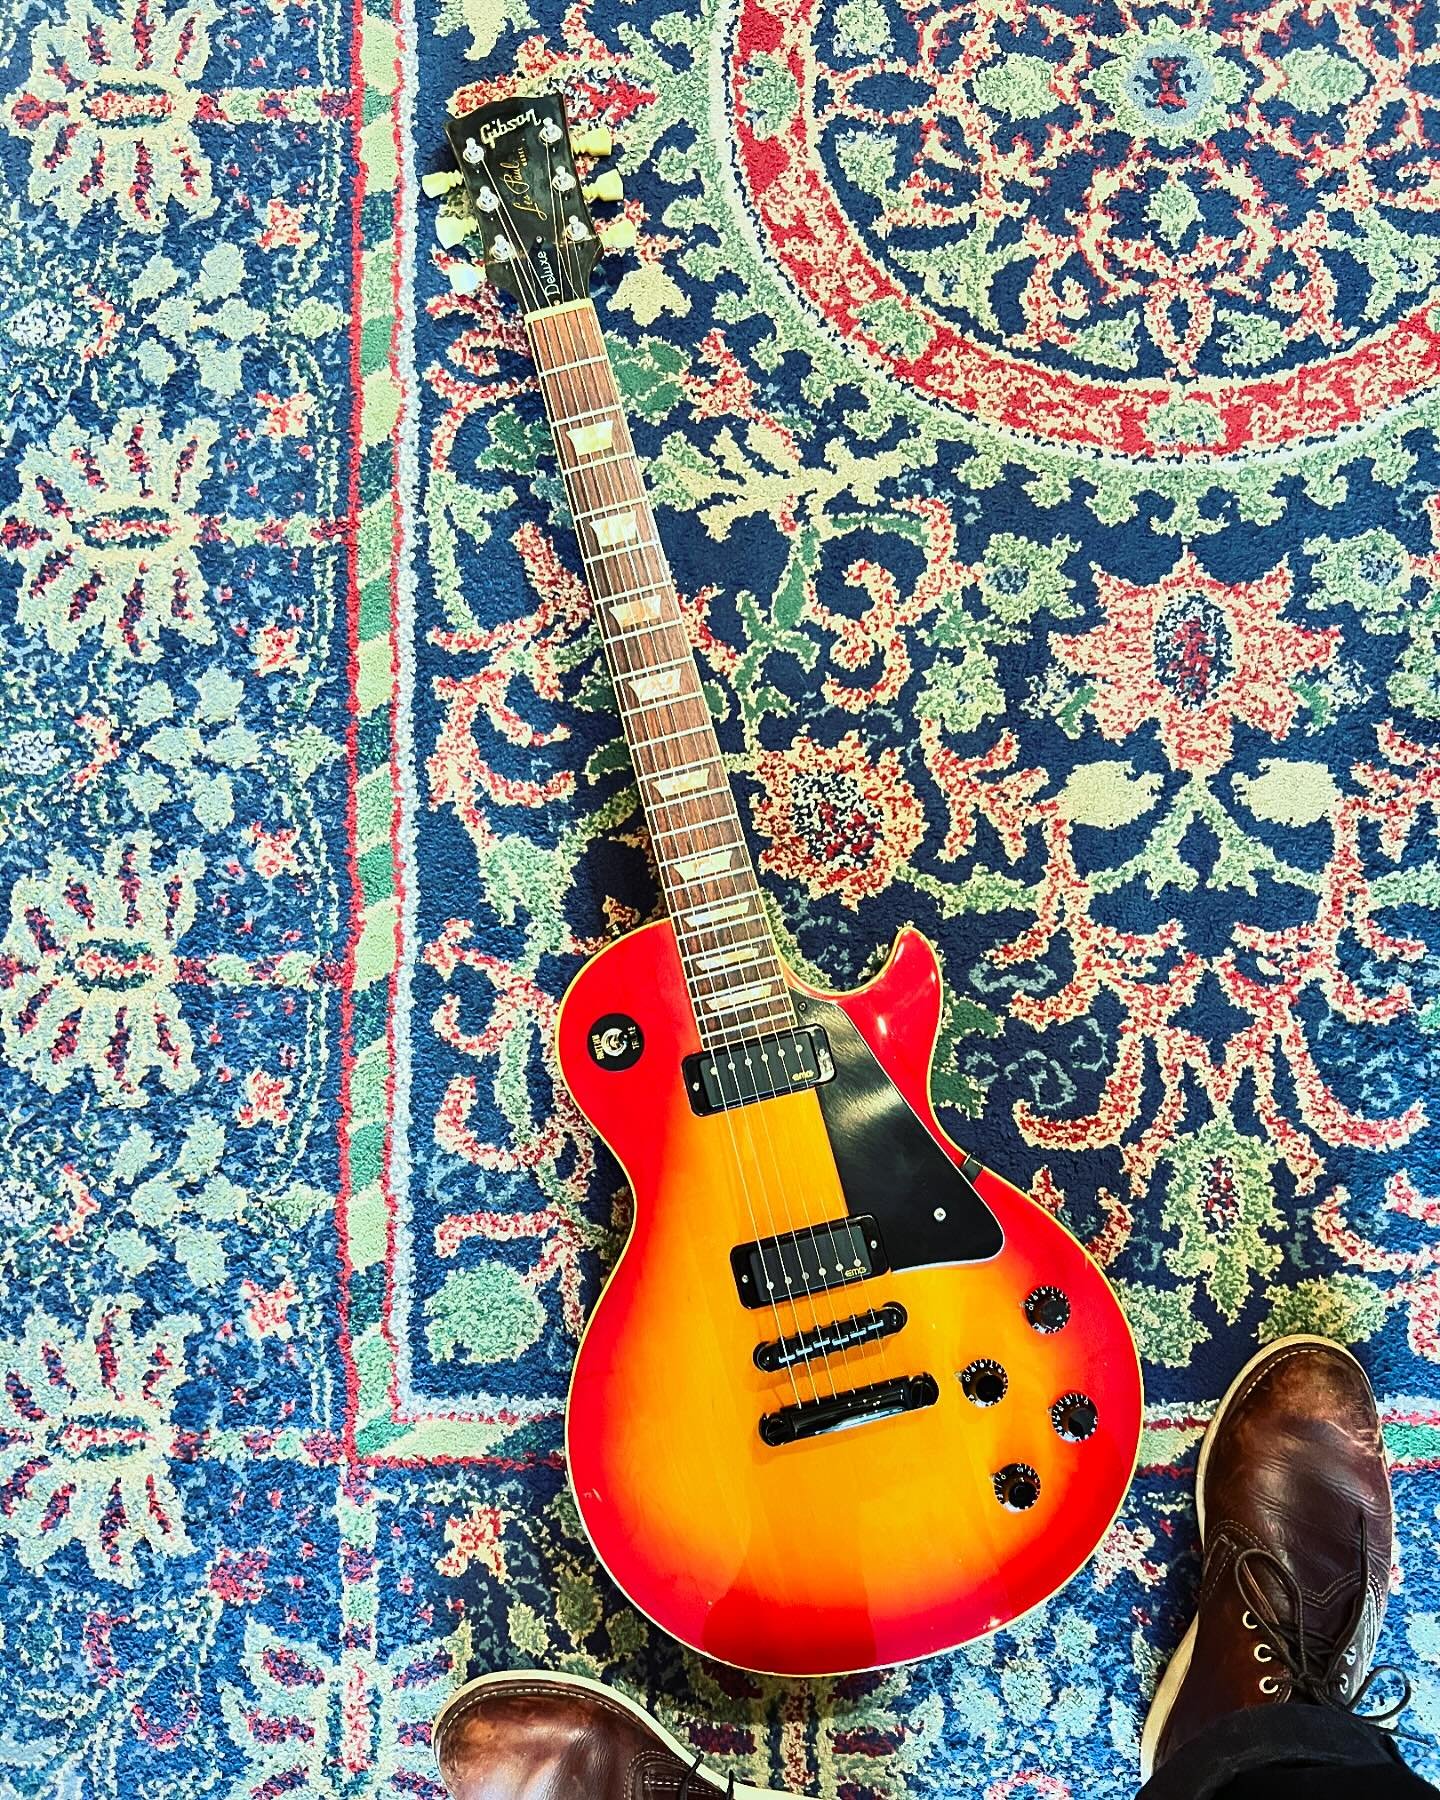 This 1977 @gibsonguitar Les Paul rips!!! It has some cool mods BUT INCLUDES all of the original parts and hardware! Appreciate it for how it is or revert back to stock! All of the options are yours! #oaklandguitars #gibson #gibsonlespaul #1977gibsonl